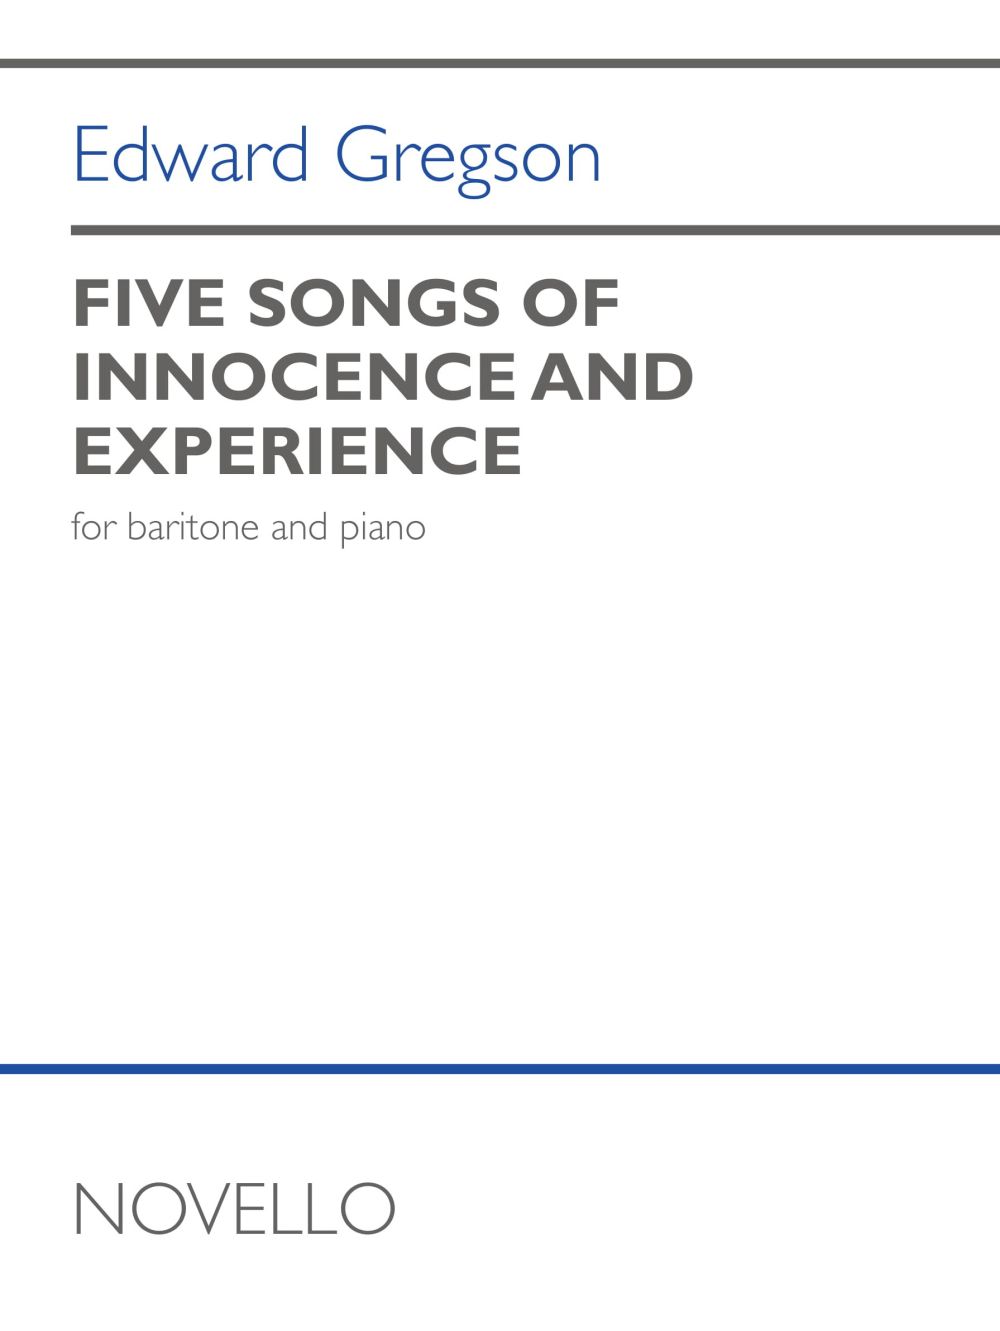 5 Songs Of Innocence And Experience (GREGSON EDWARD)